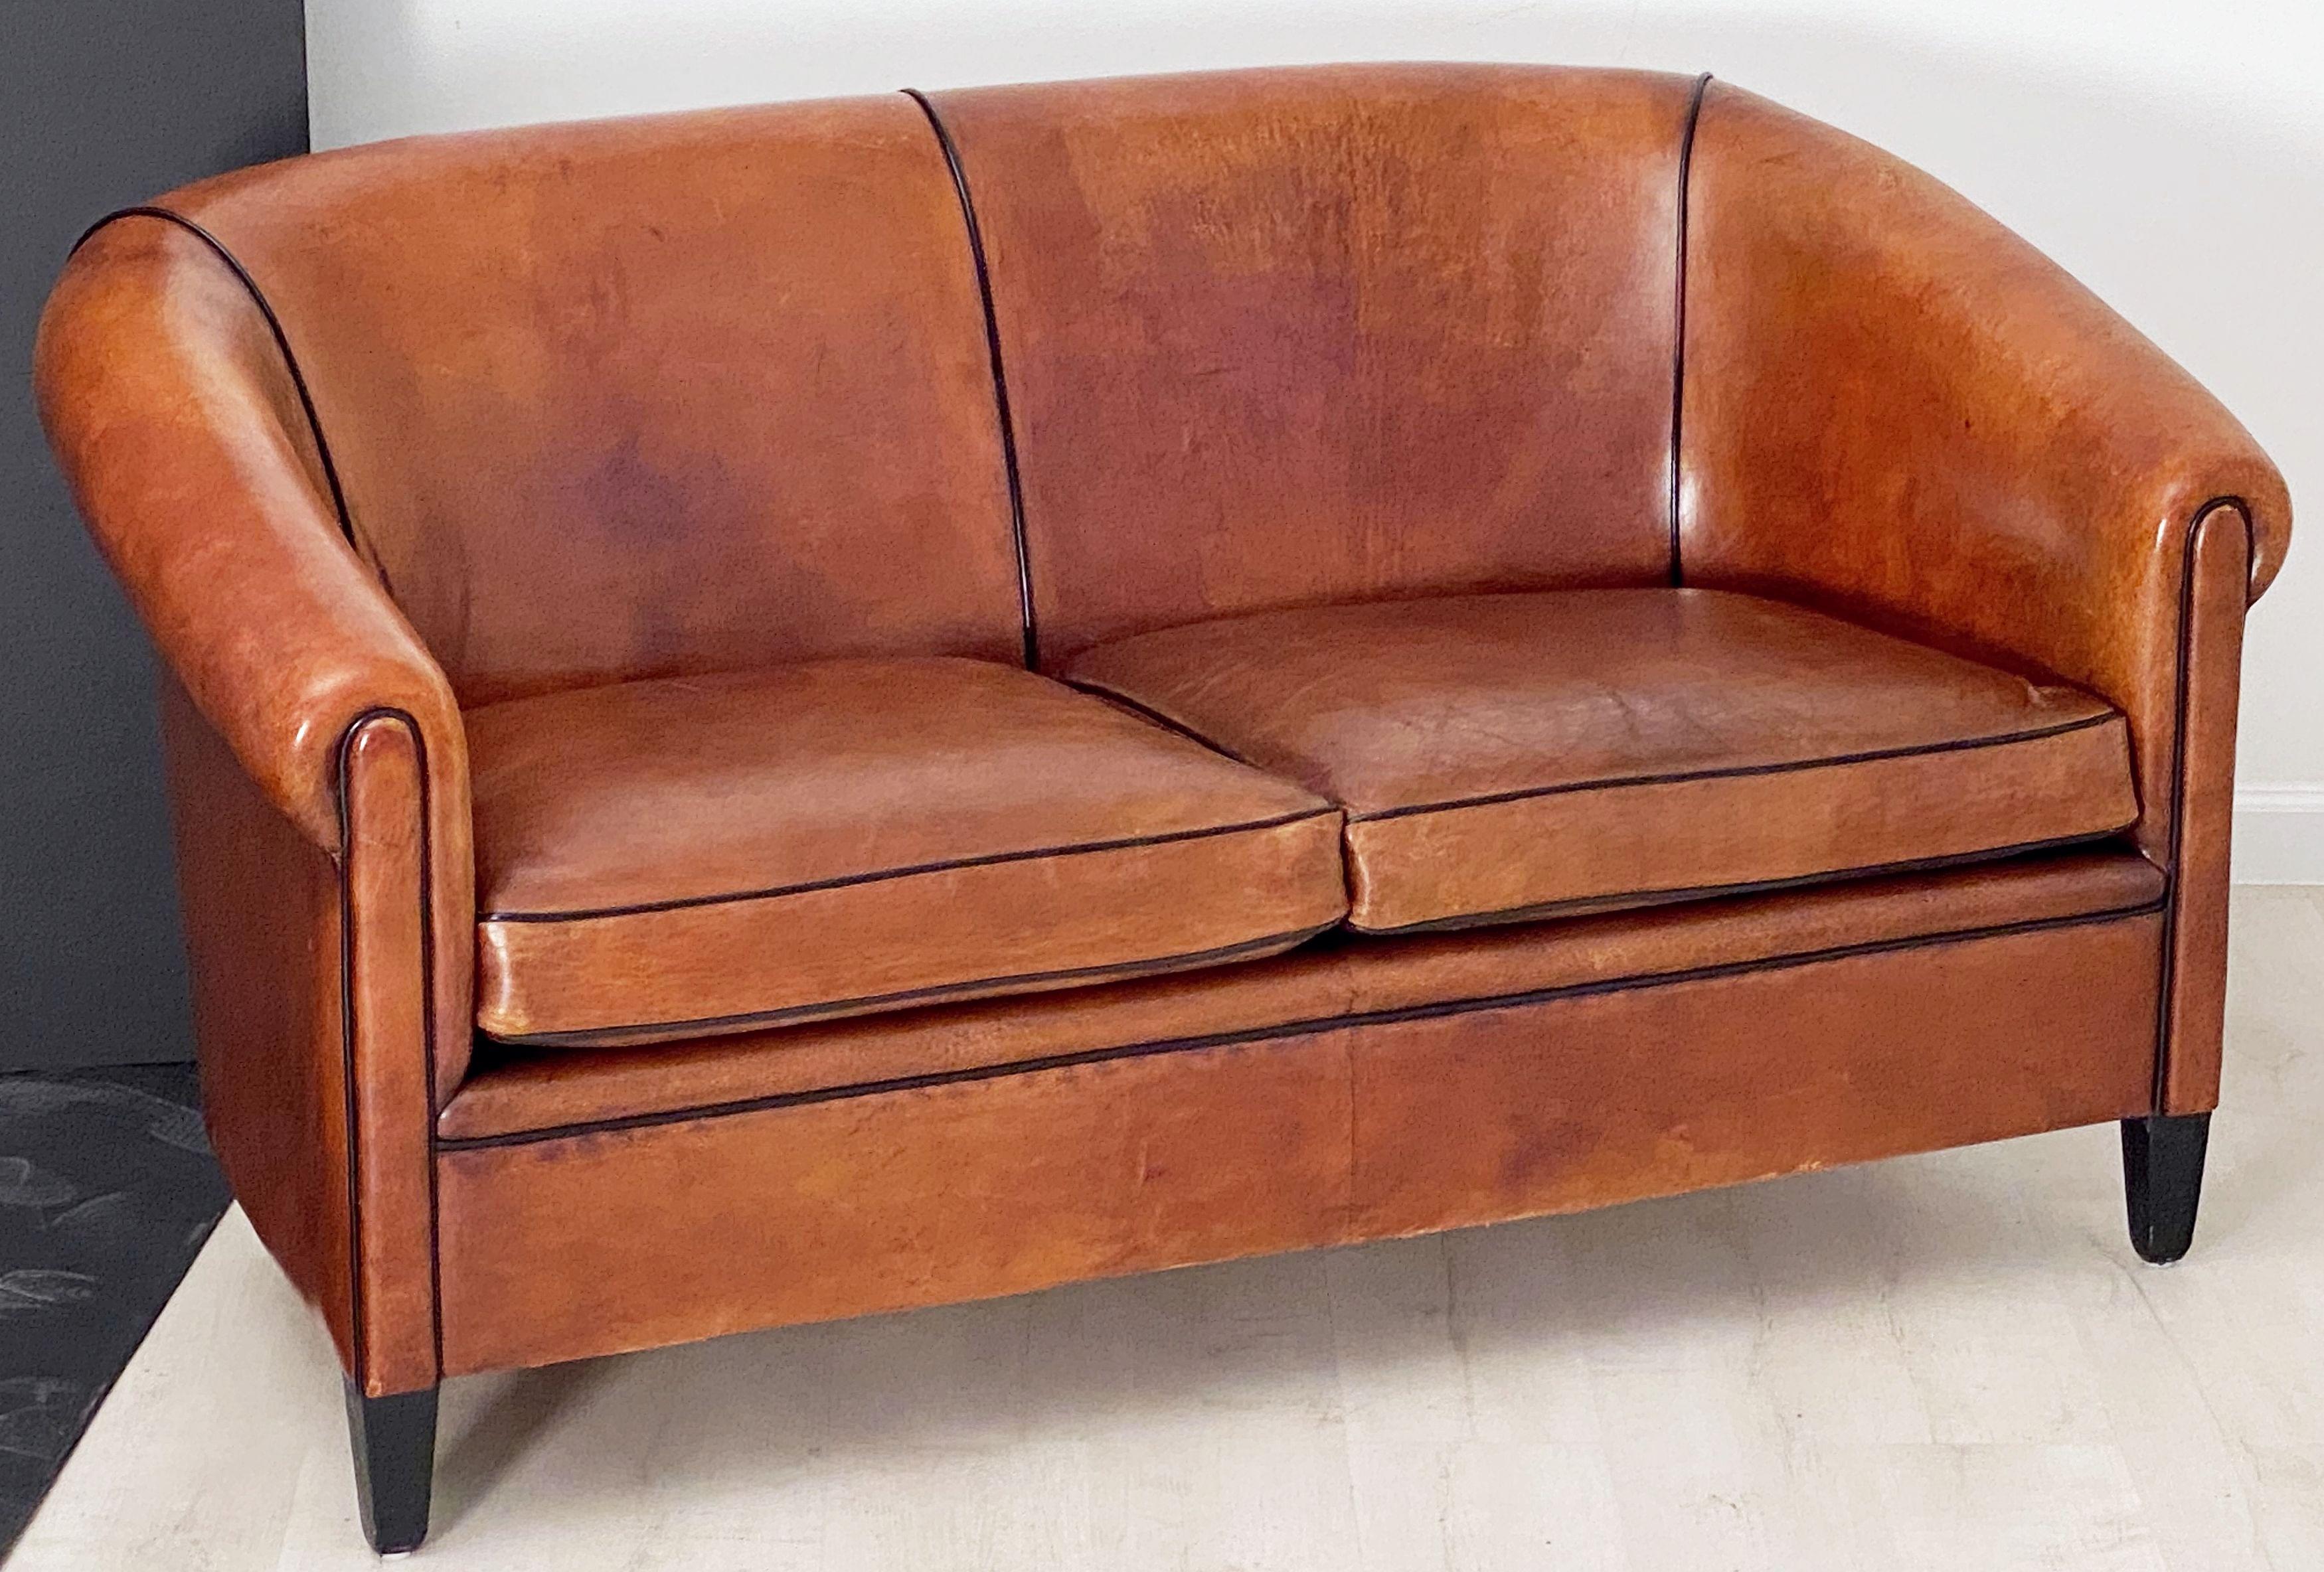 Dutch Upholstered Leather Sofa or Settee in the Art Deco Style 4